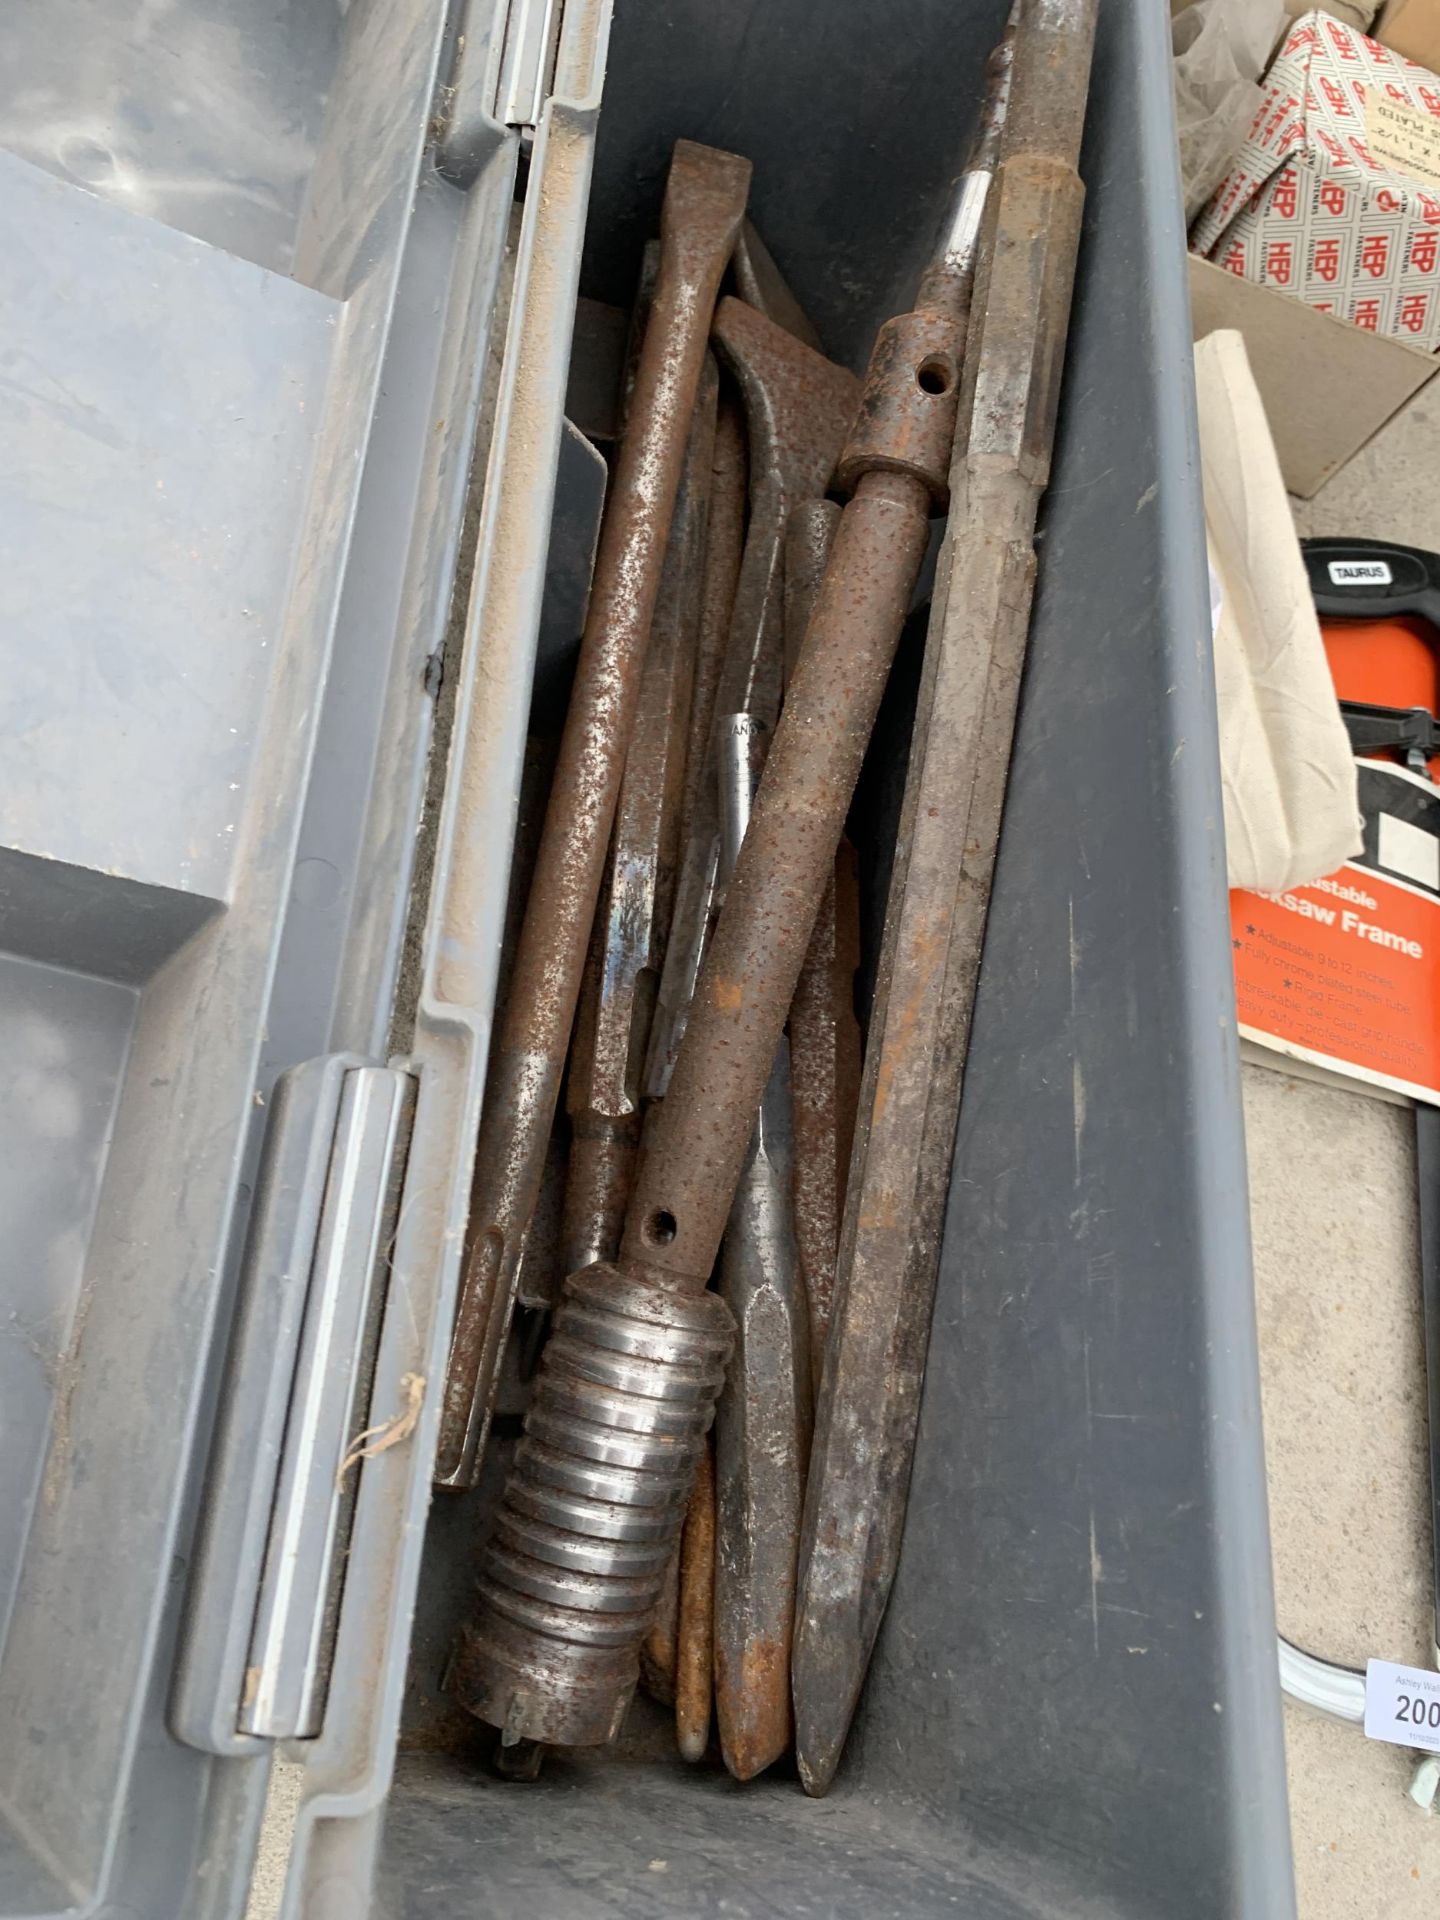 AN ASSORTMENT OF TOOLS TO INCLUDE A HACK SAW, CHISELS AND A STANLET SCREW DRIVER ETC - Image 3 of 3